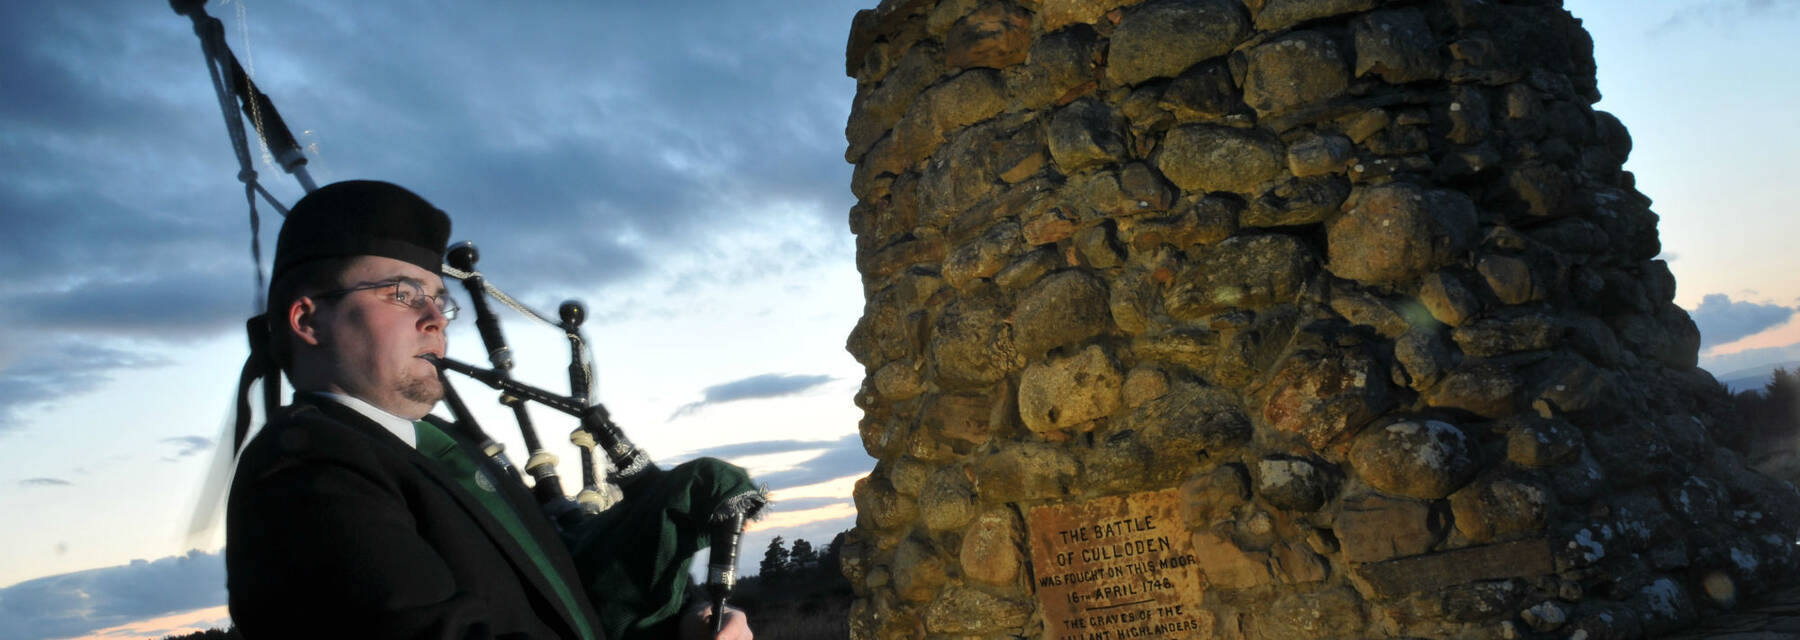 Piper at the memorial cairn at Culloden Battlefield